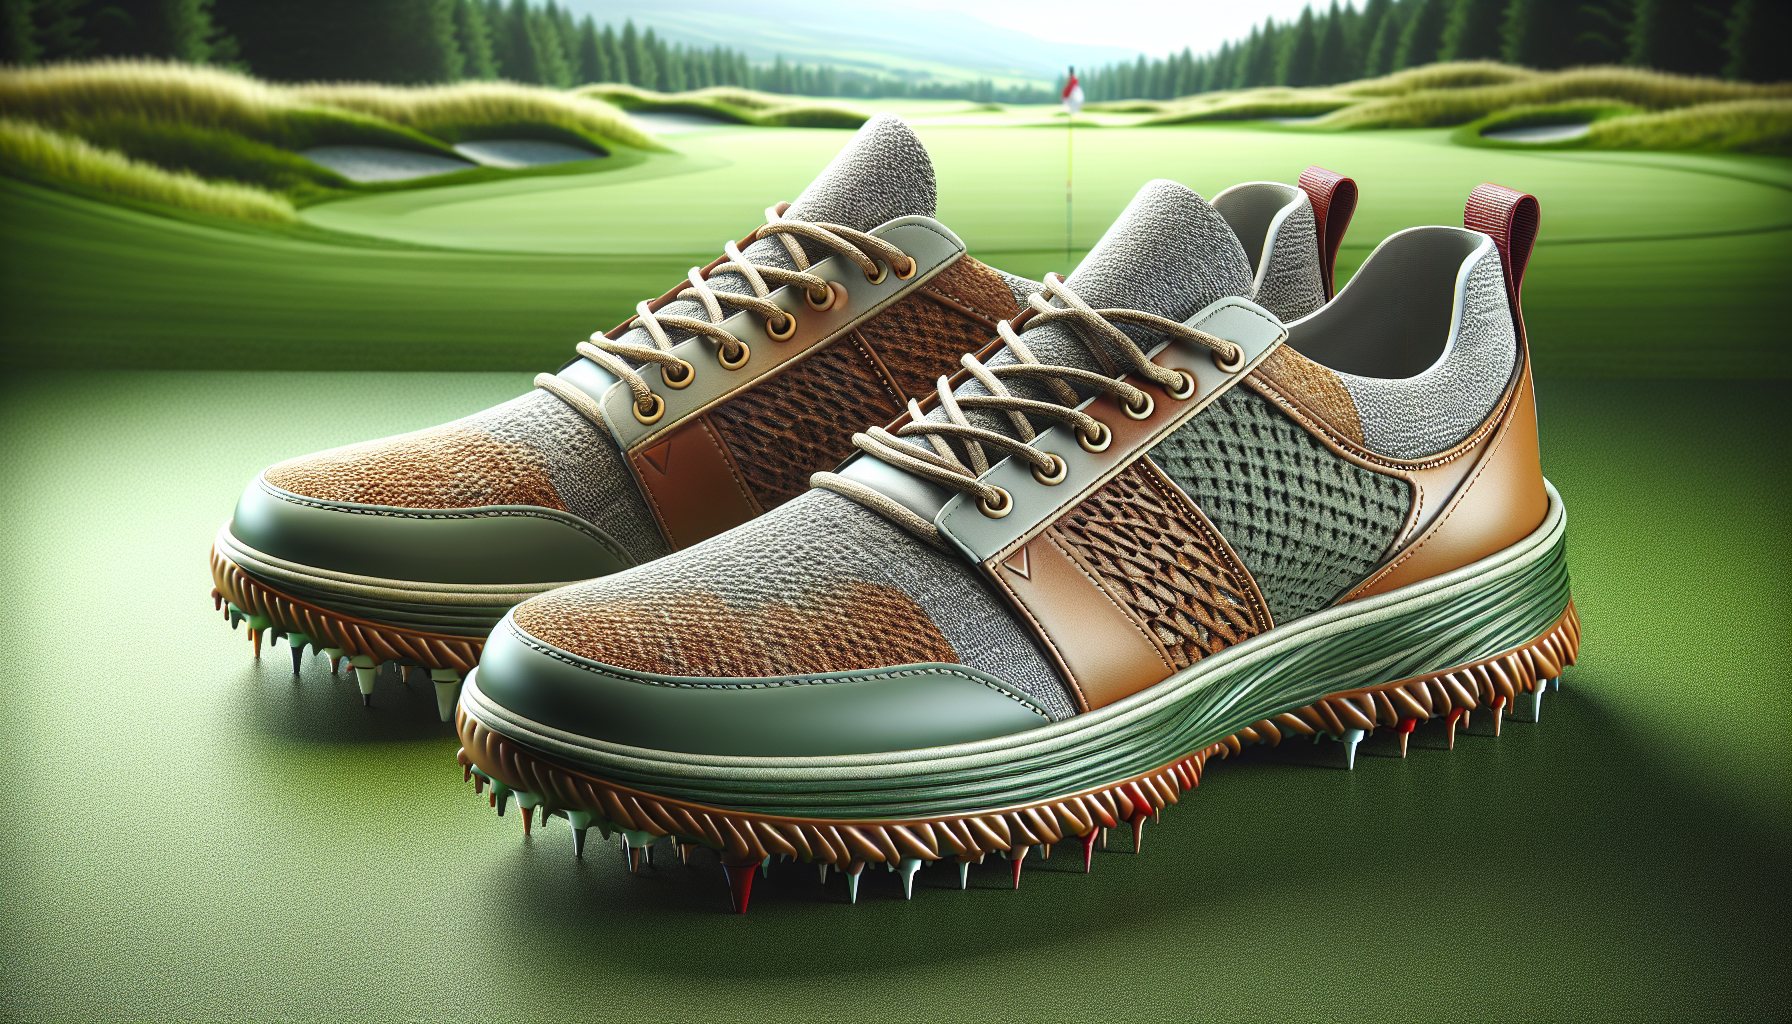 Spikeless golf shoes for casual golfers